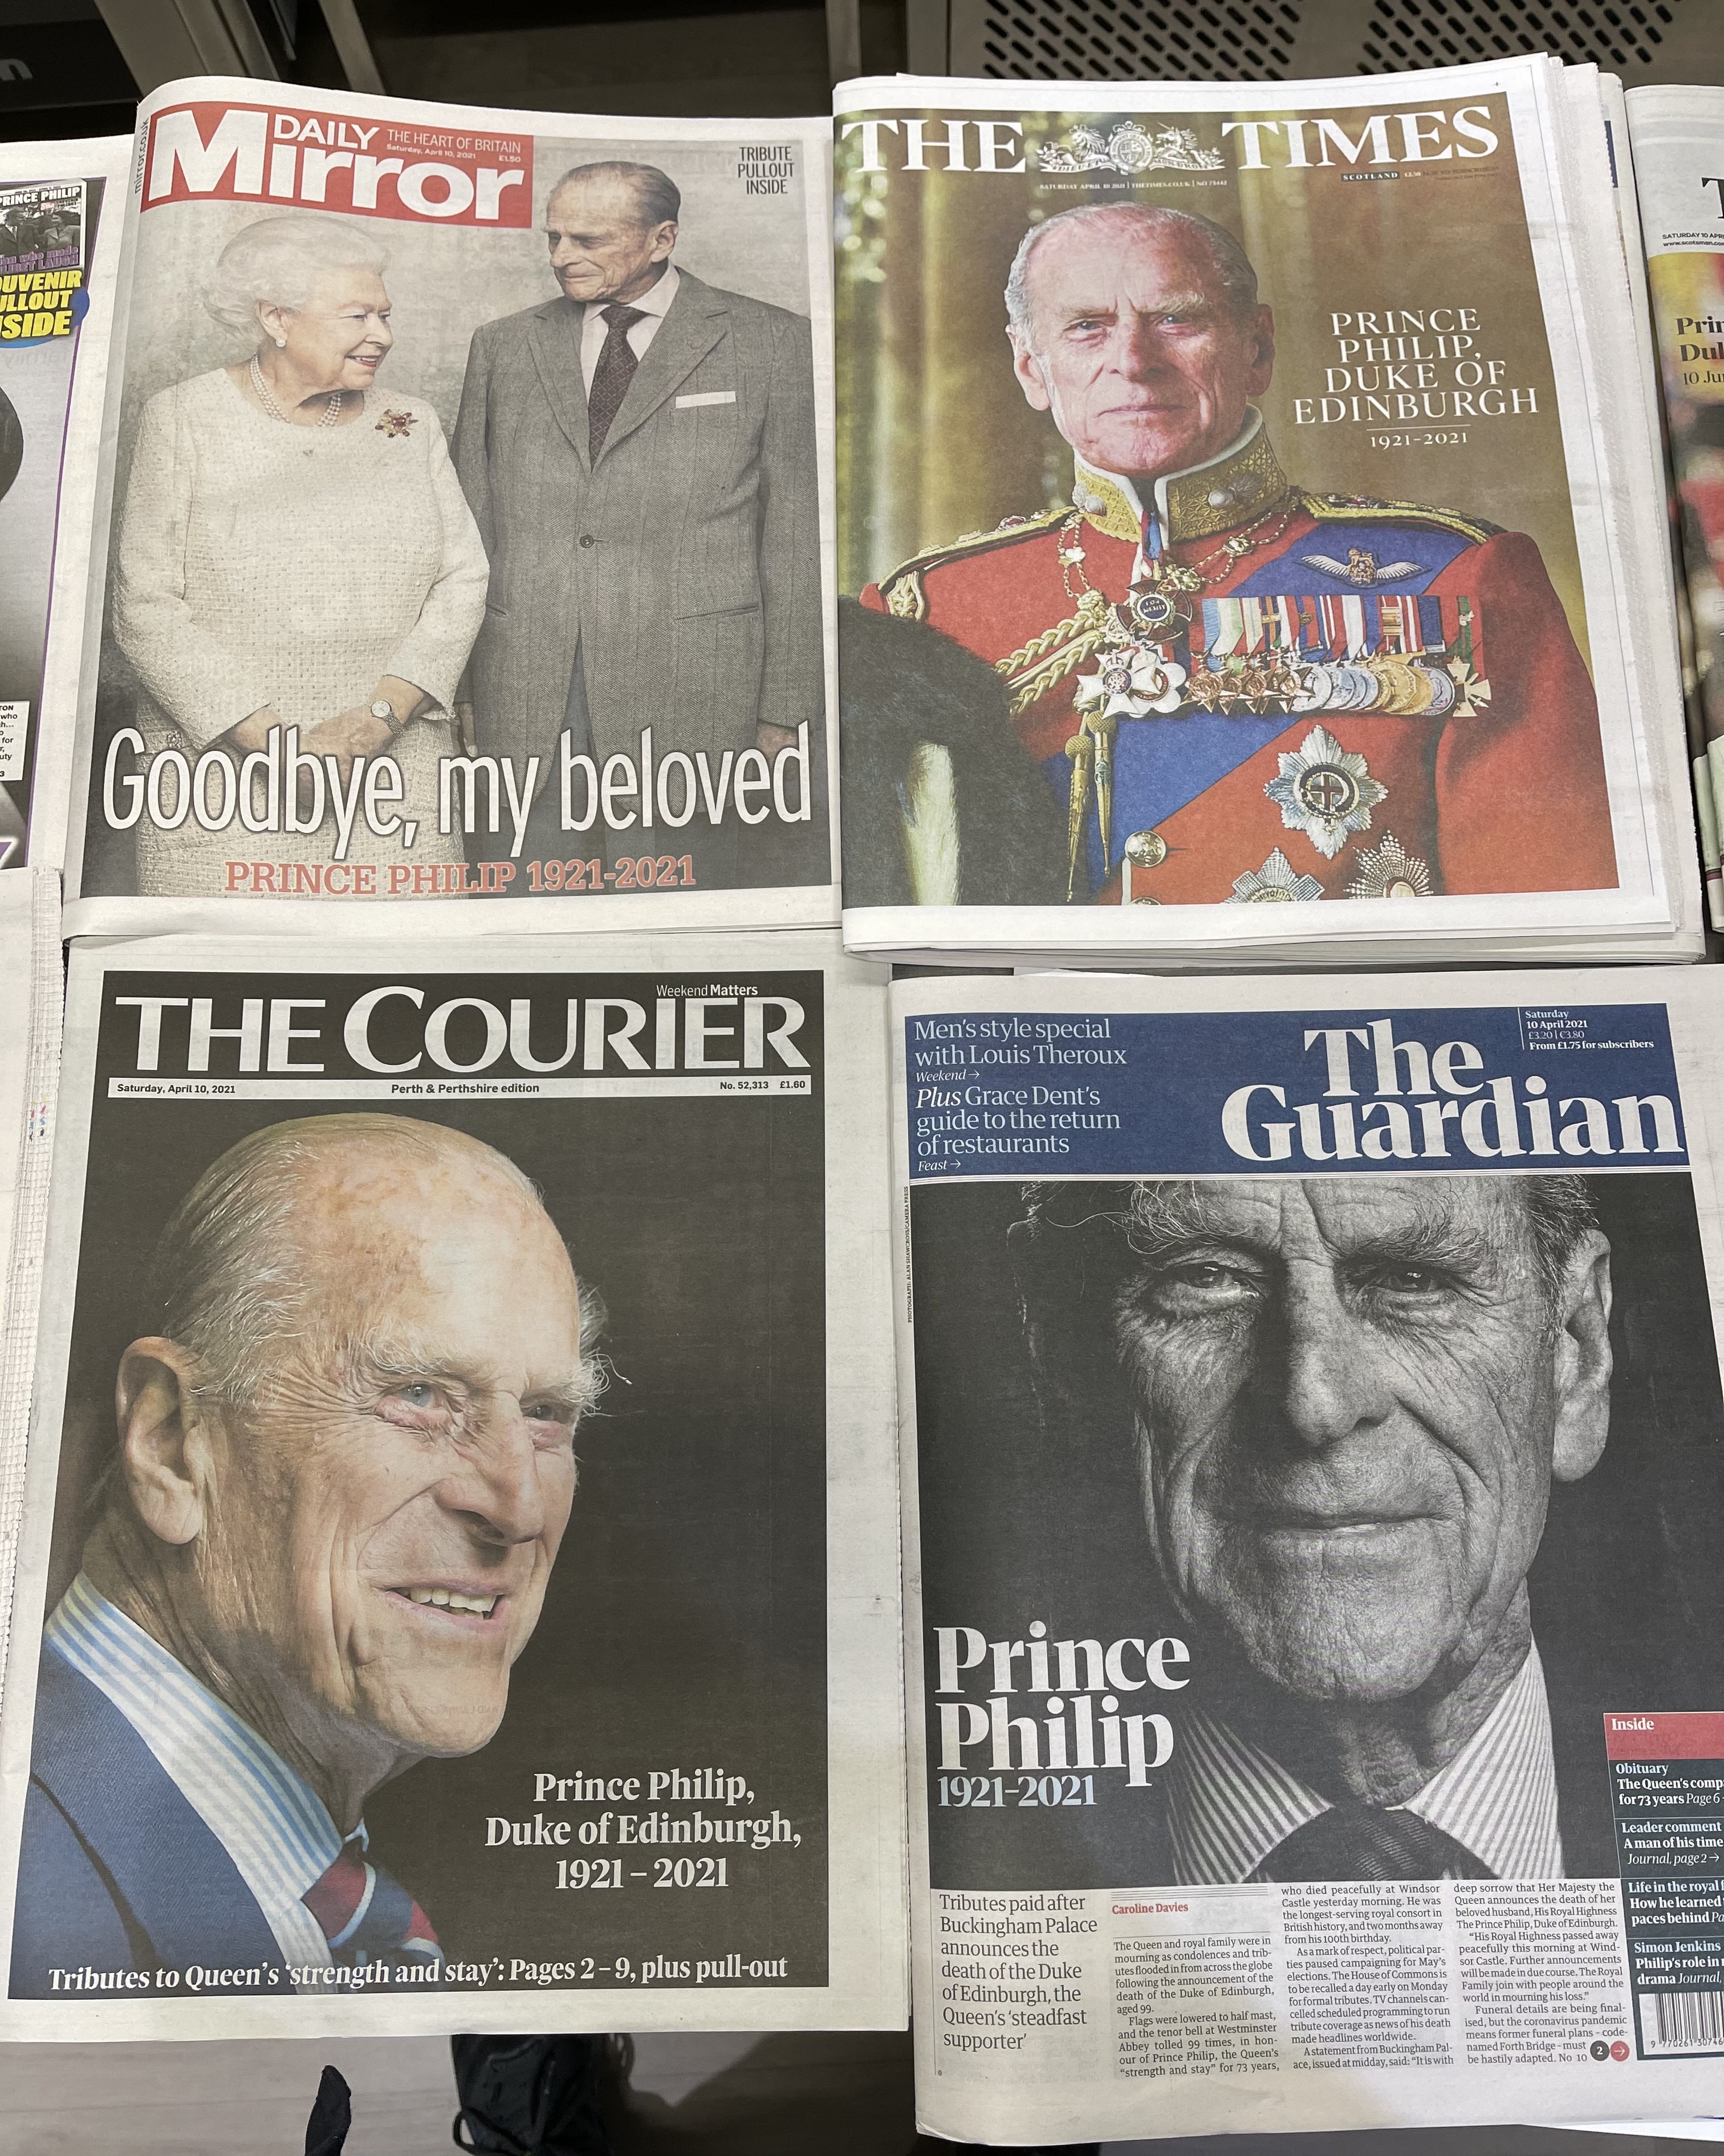 Above: Just a few of the newspapers the day after the Duke of Edinburgh’s death was announced.